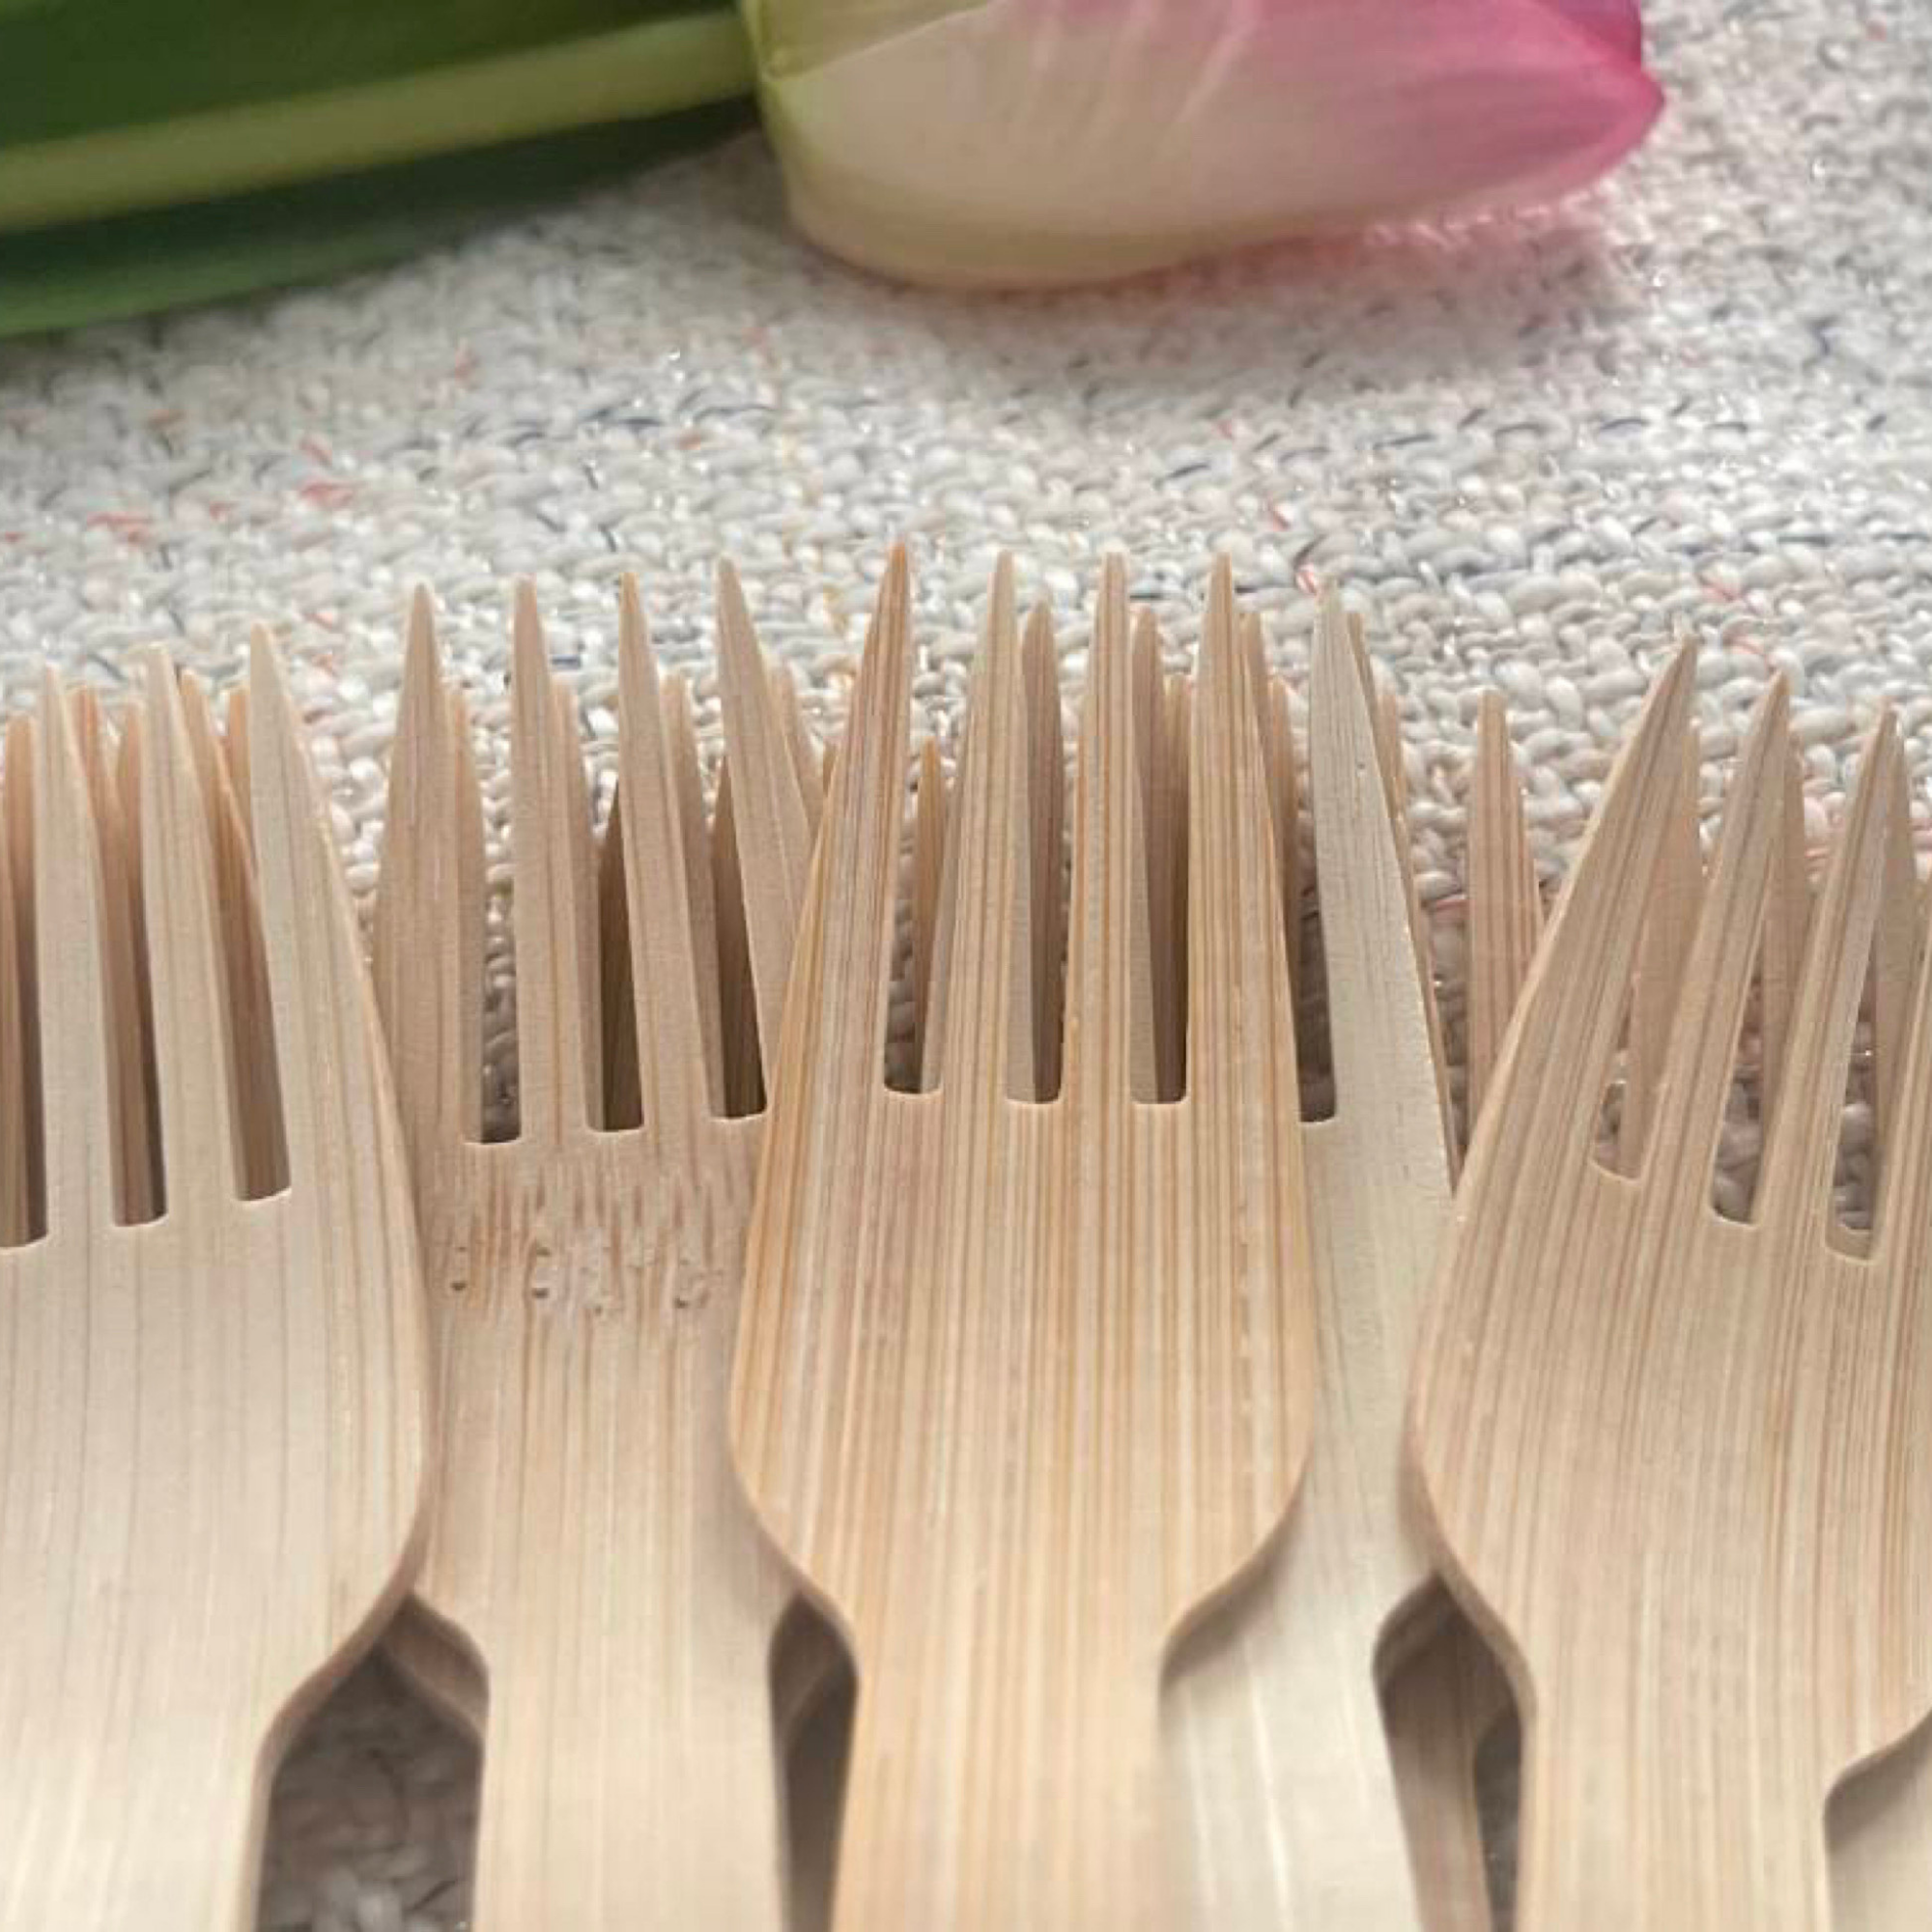 Holy City Straw Co. close up unwrapped bamboo forks bunch